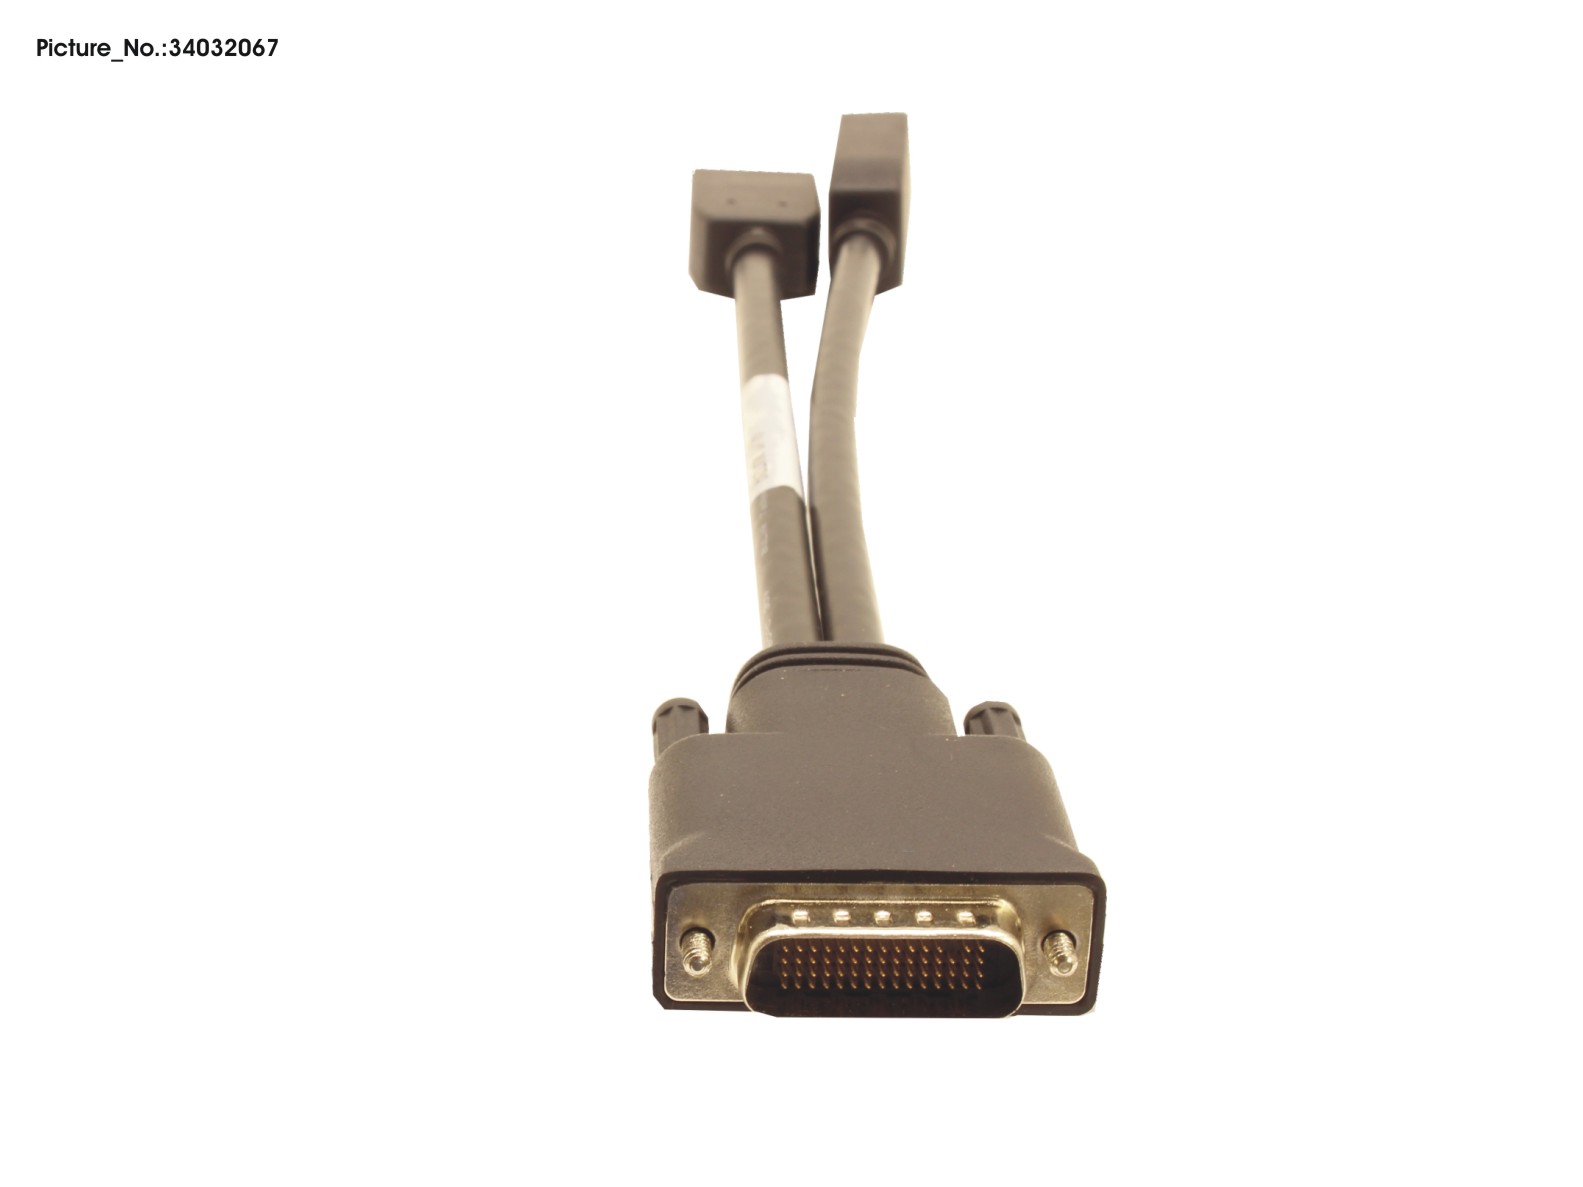 LFH59 2X DP ADAPTER CABLE